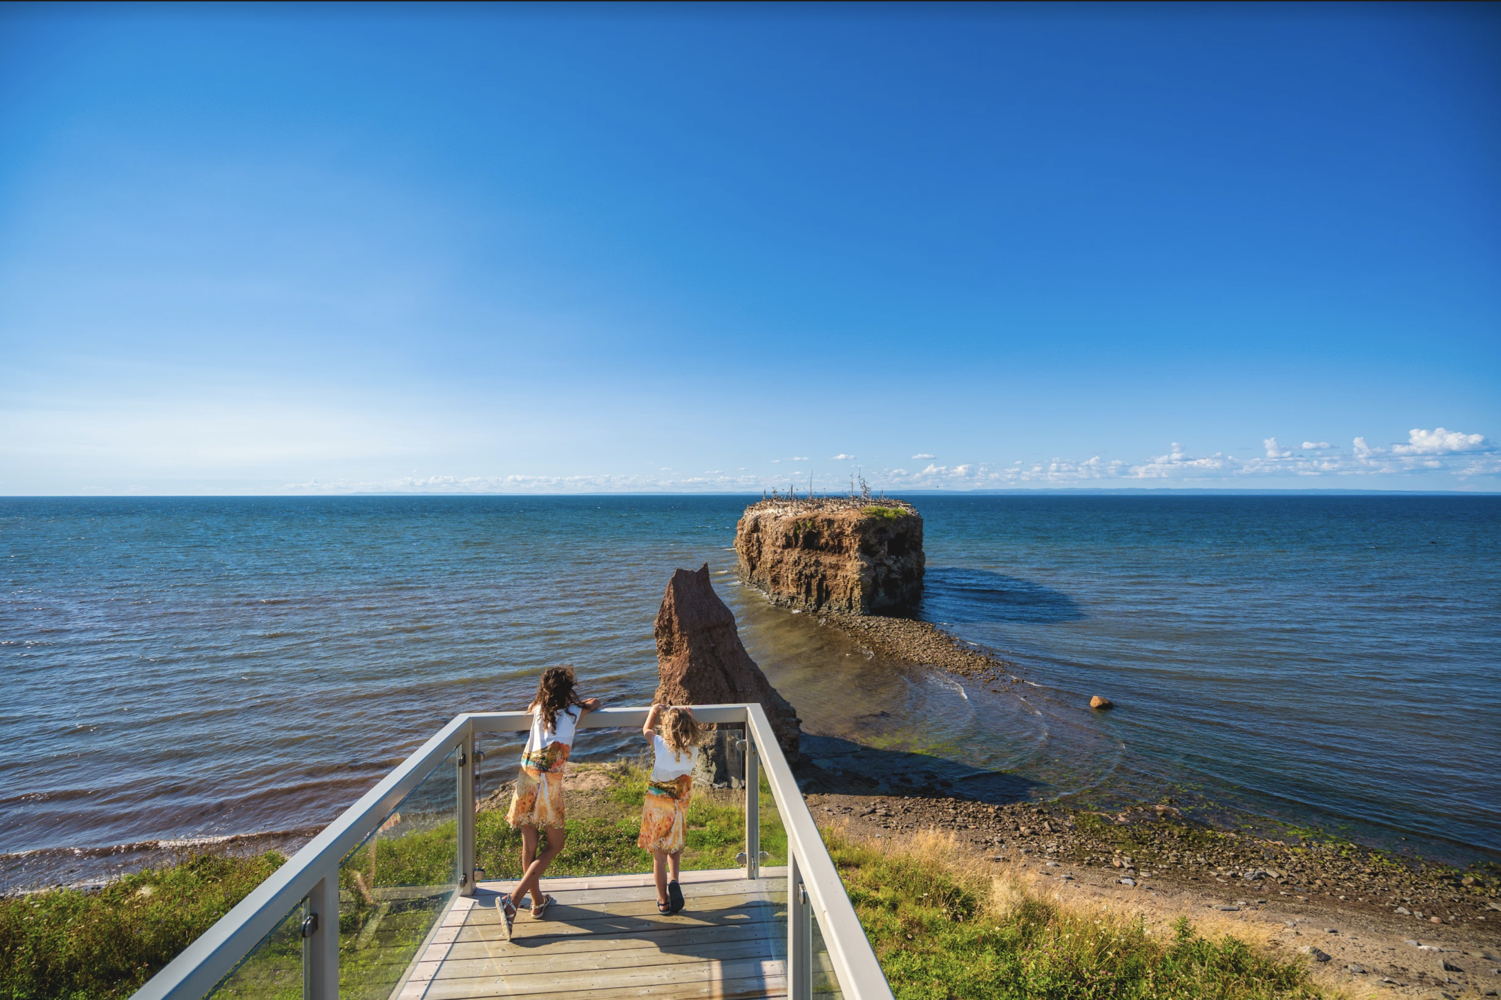 10 good reasons to visit the Chaleur region this summer, Stories, Explore the  Chaleur Region in New Brunswick